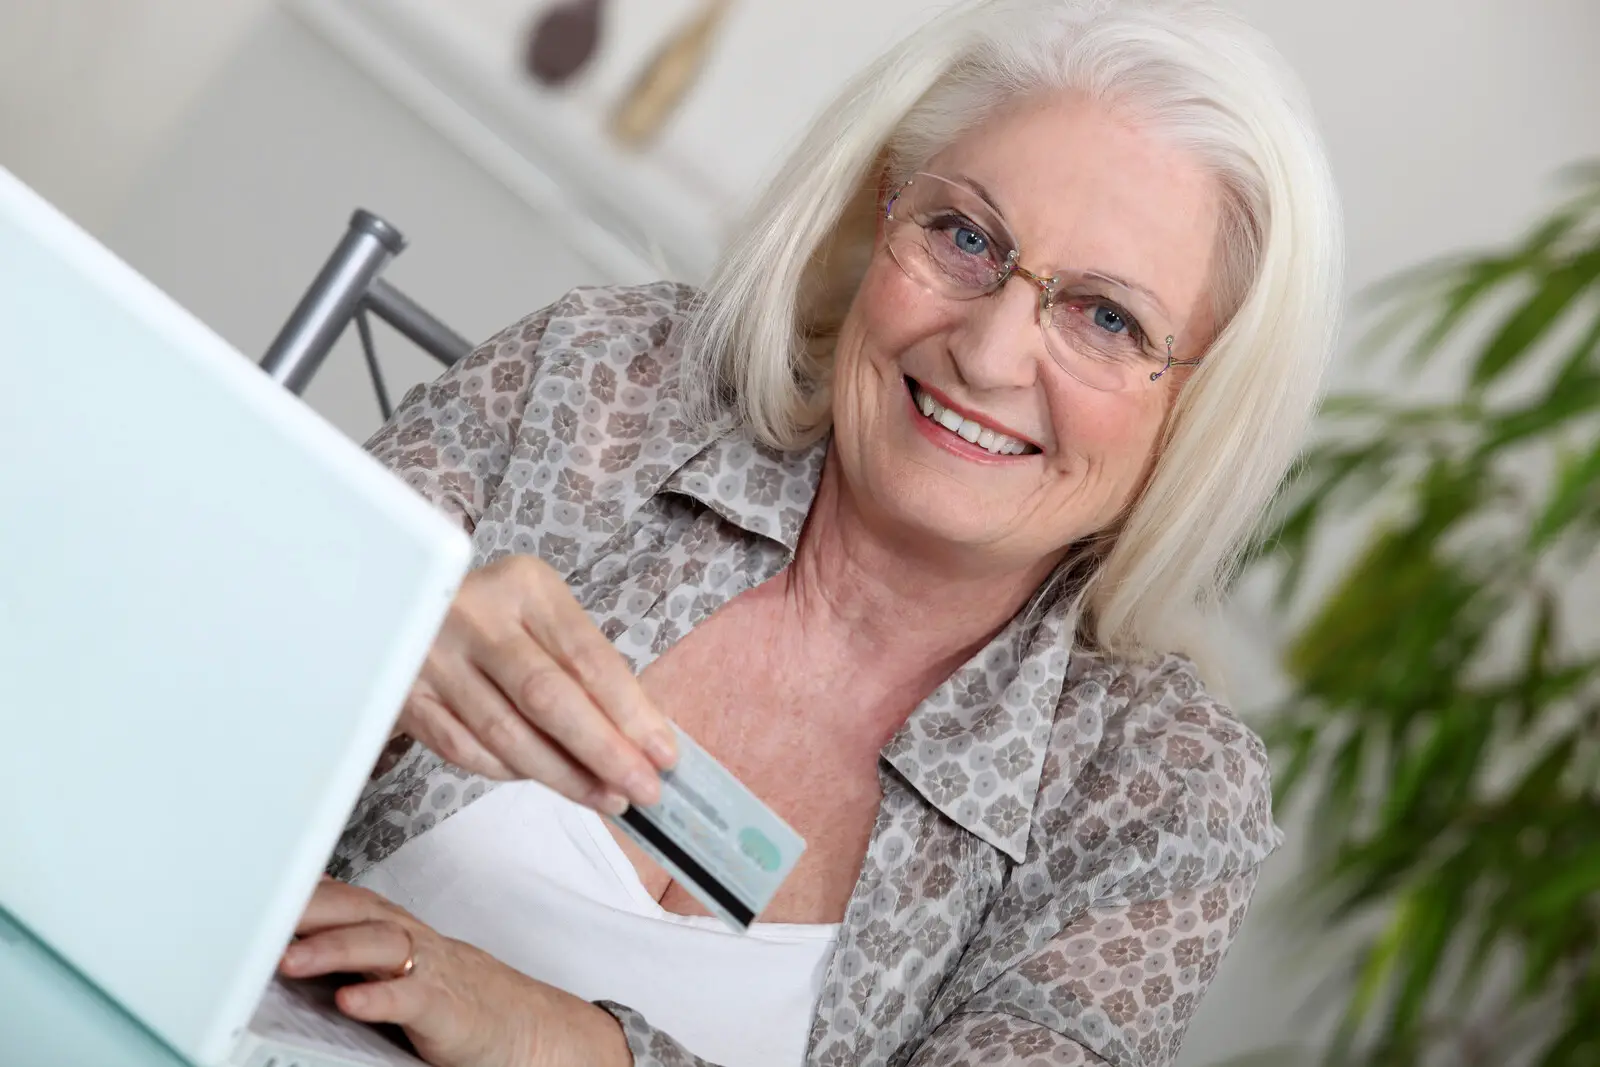 Senior woman at a home computer smiling with a card in her hand about to make a purchase